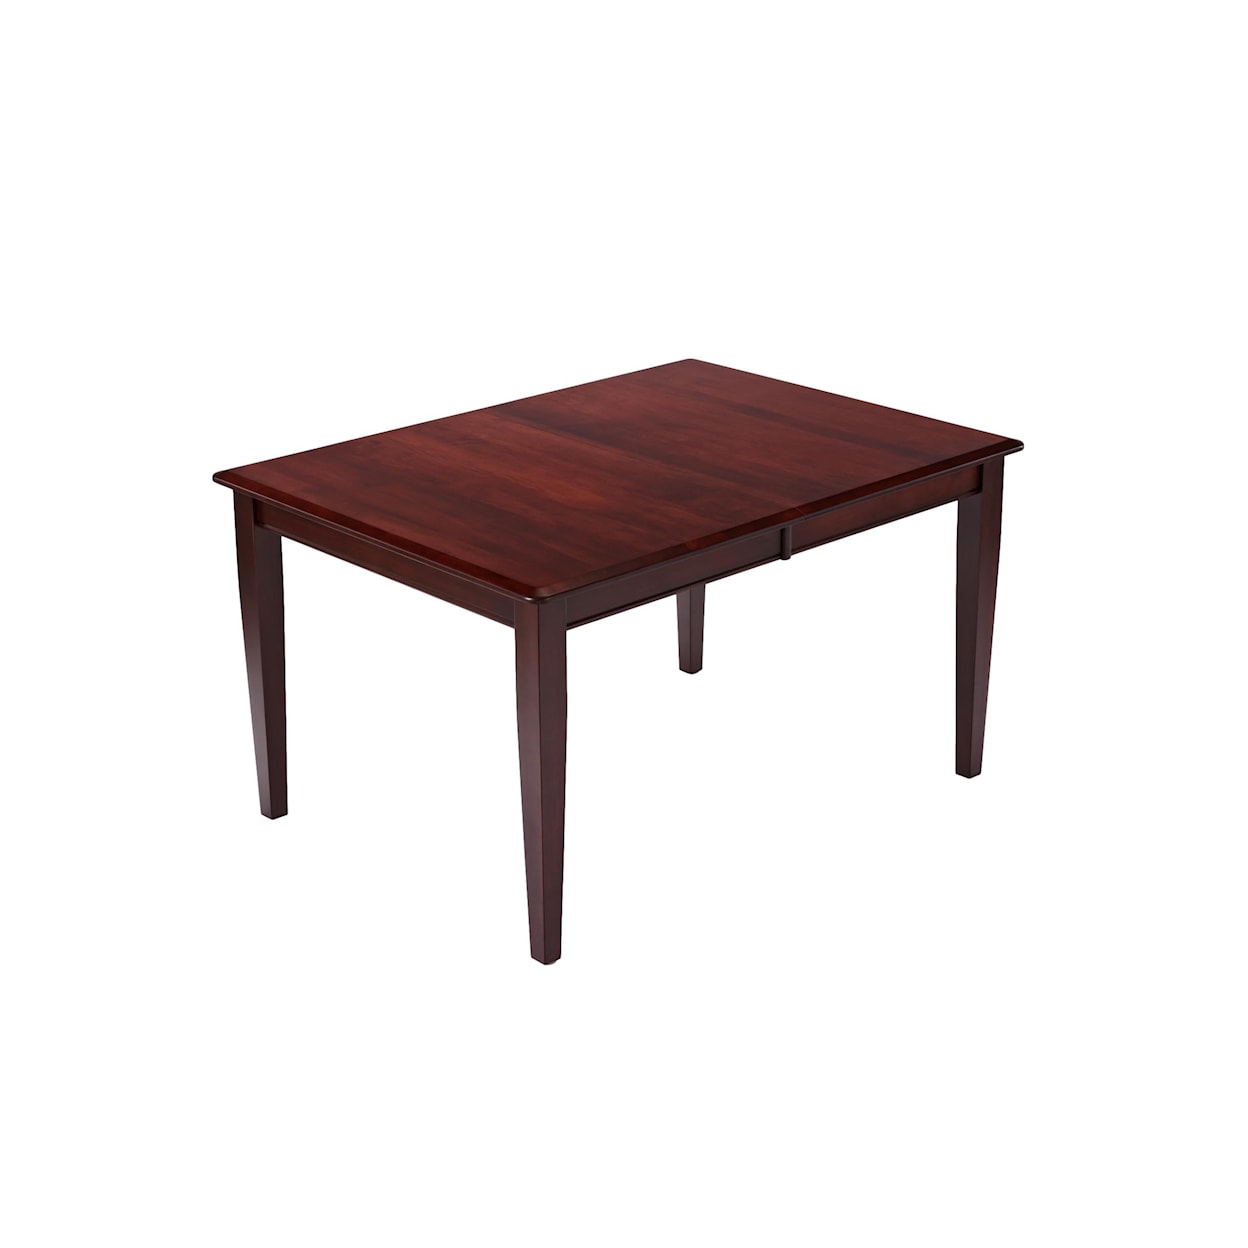 L.J. Gascho Furniture Anniversary Anniversary Dining Table